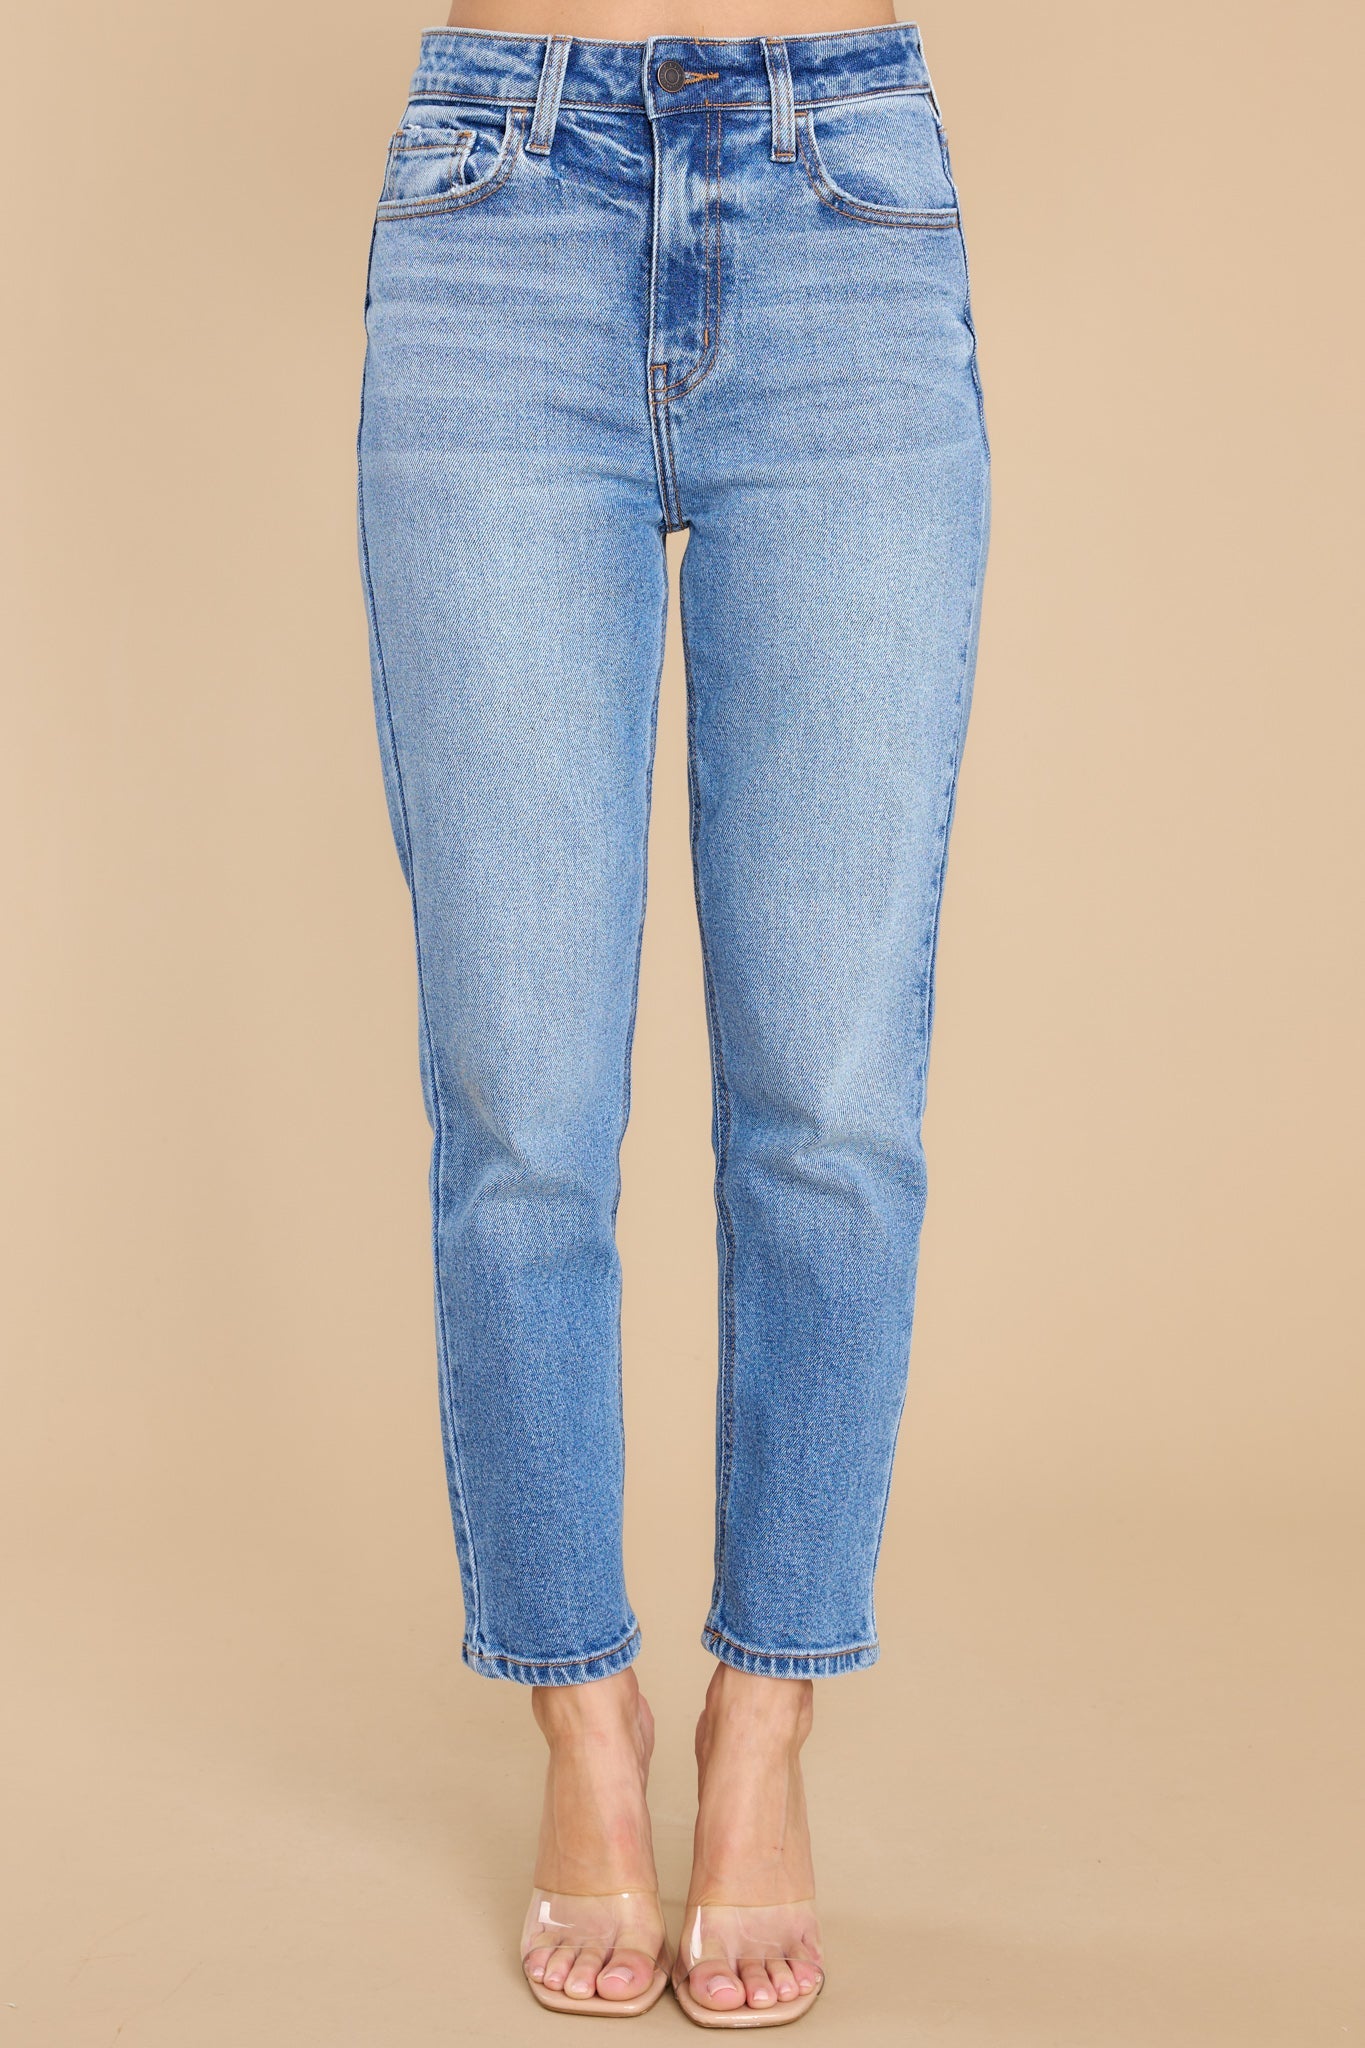 Taking Over Medium Wash Straight Jeans - Red Dress